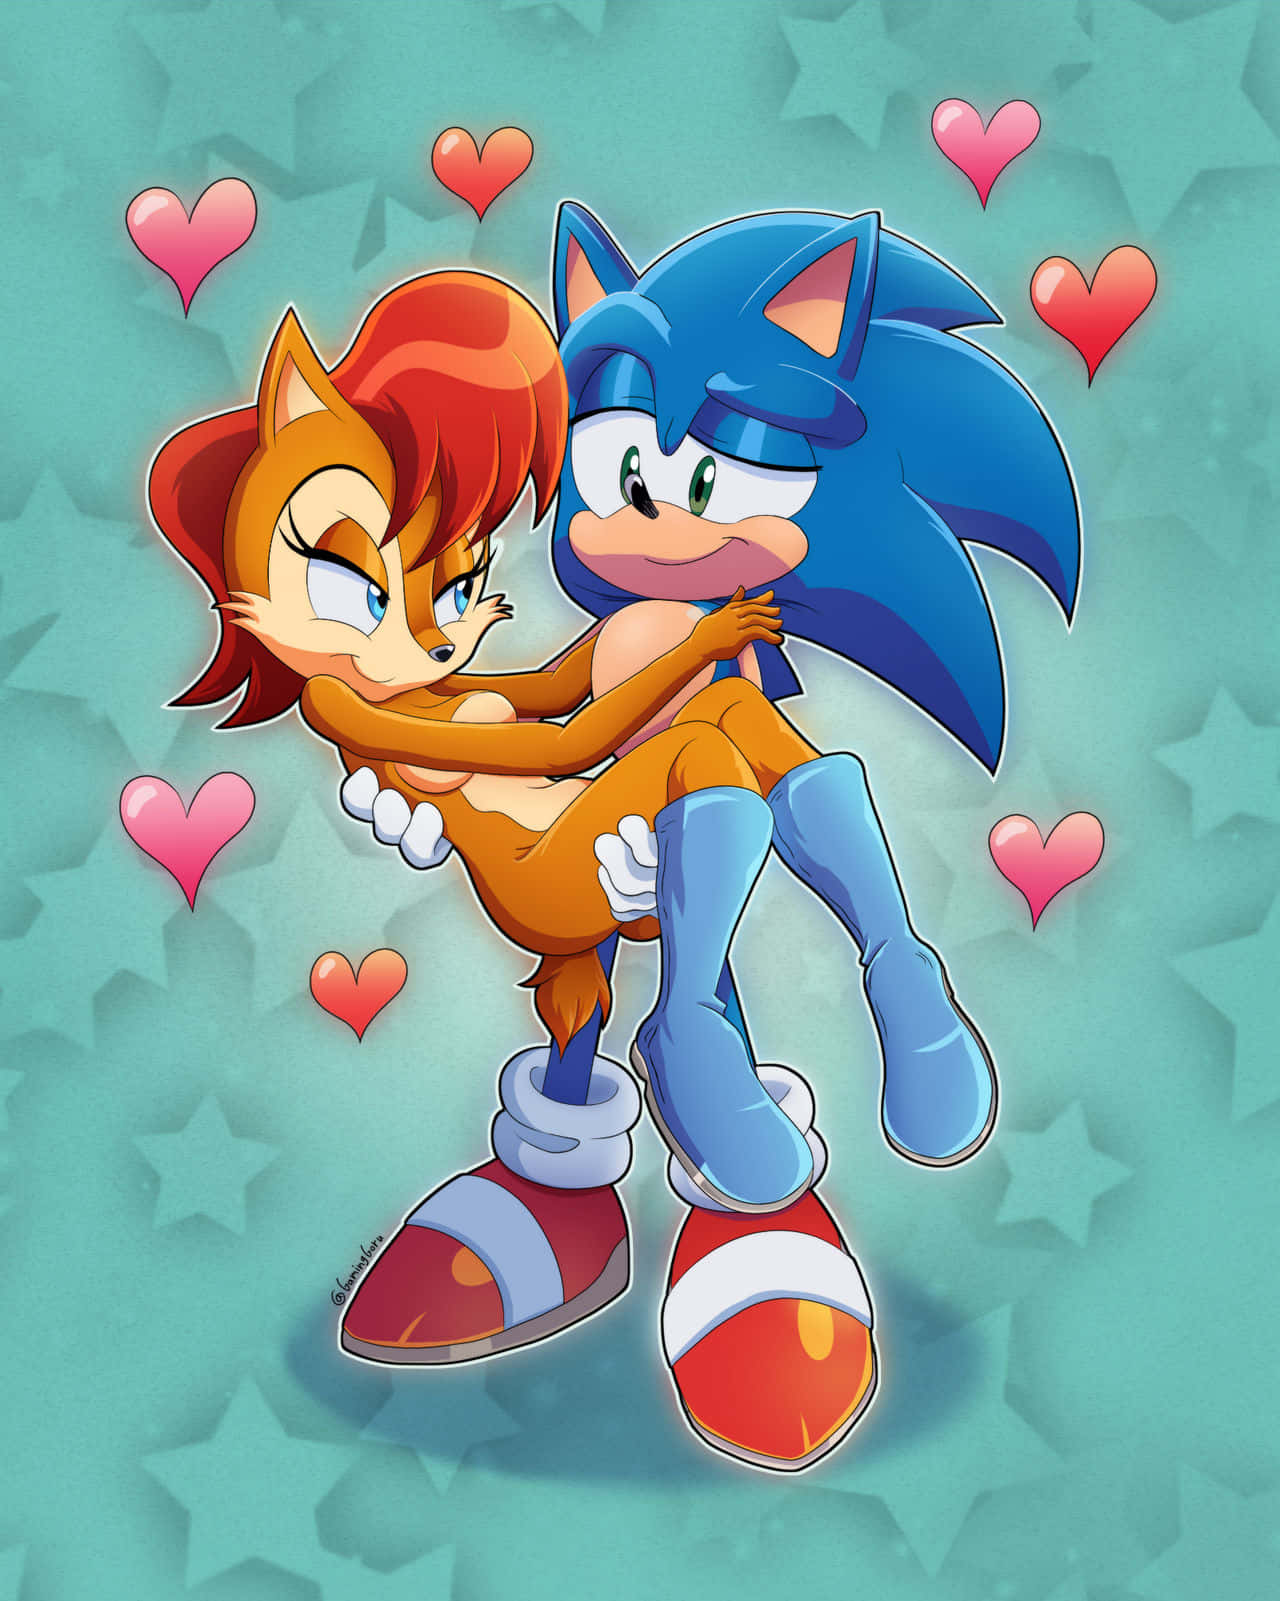 Sonic and Sally together in a sweet embrace Wallpaper